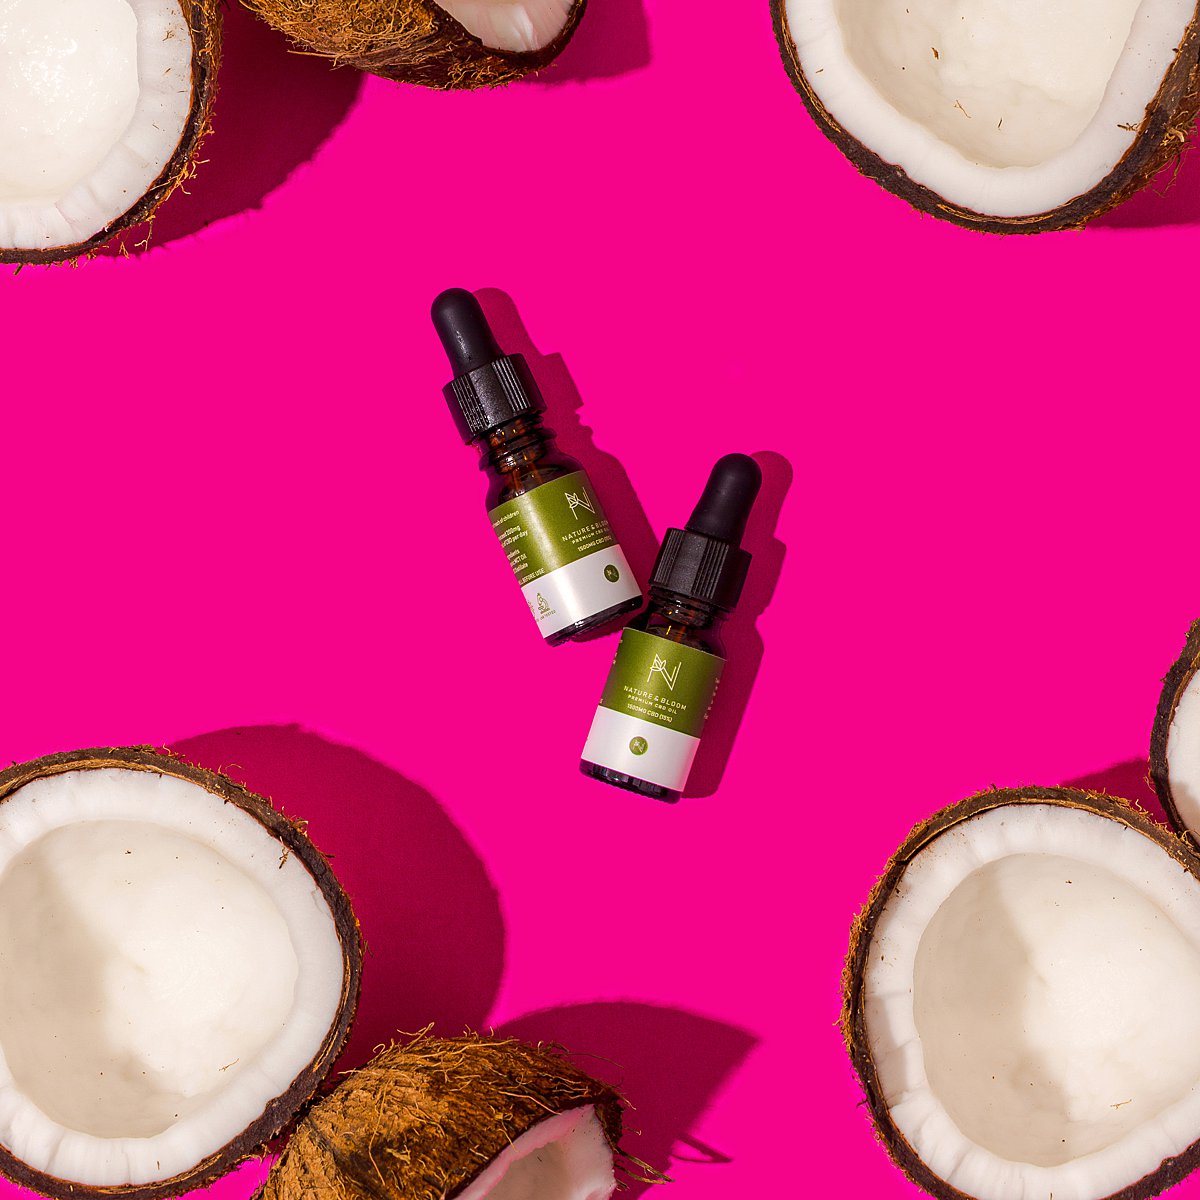 Colourful content creation for Nature & Bloom CBD oil. Styled stills and lifestyle product photography by Marianne Taylor.